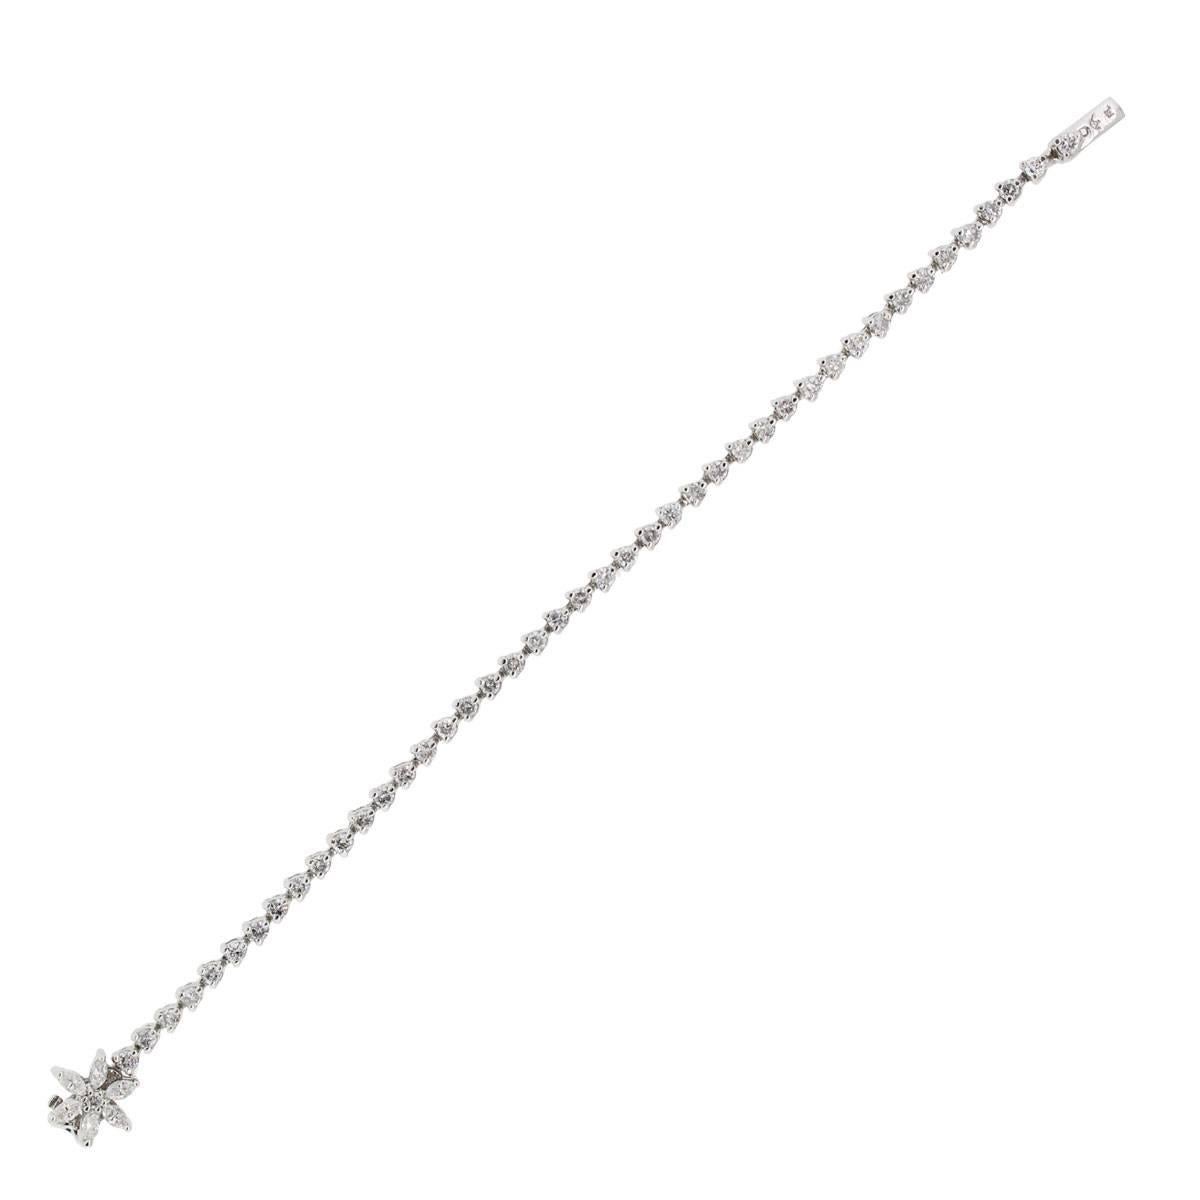 Material: Platinum
Diamond Details: Approximately 2.50ctw of round brilliant diamonds and baguette shape diamonds. Diamonds are G/H in color and VS in clarity.
Clasp: Tongue in box Clasp
Total Weight: 12.8g (8.3dwt)
Measurements: will fit up to a 6